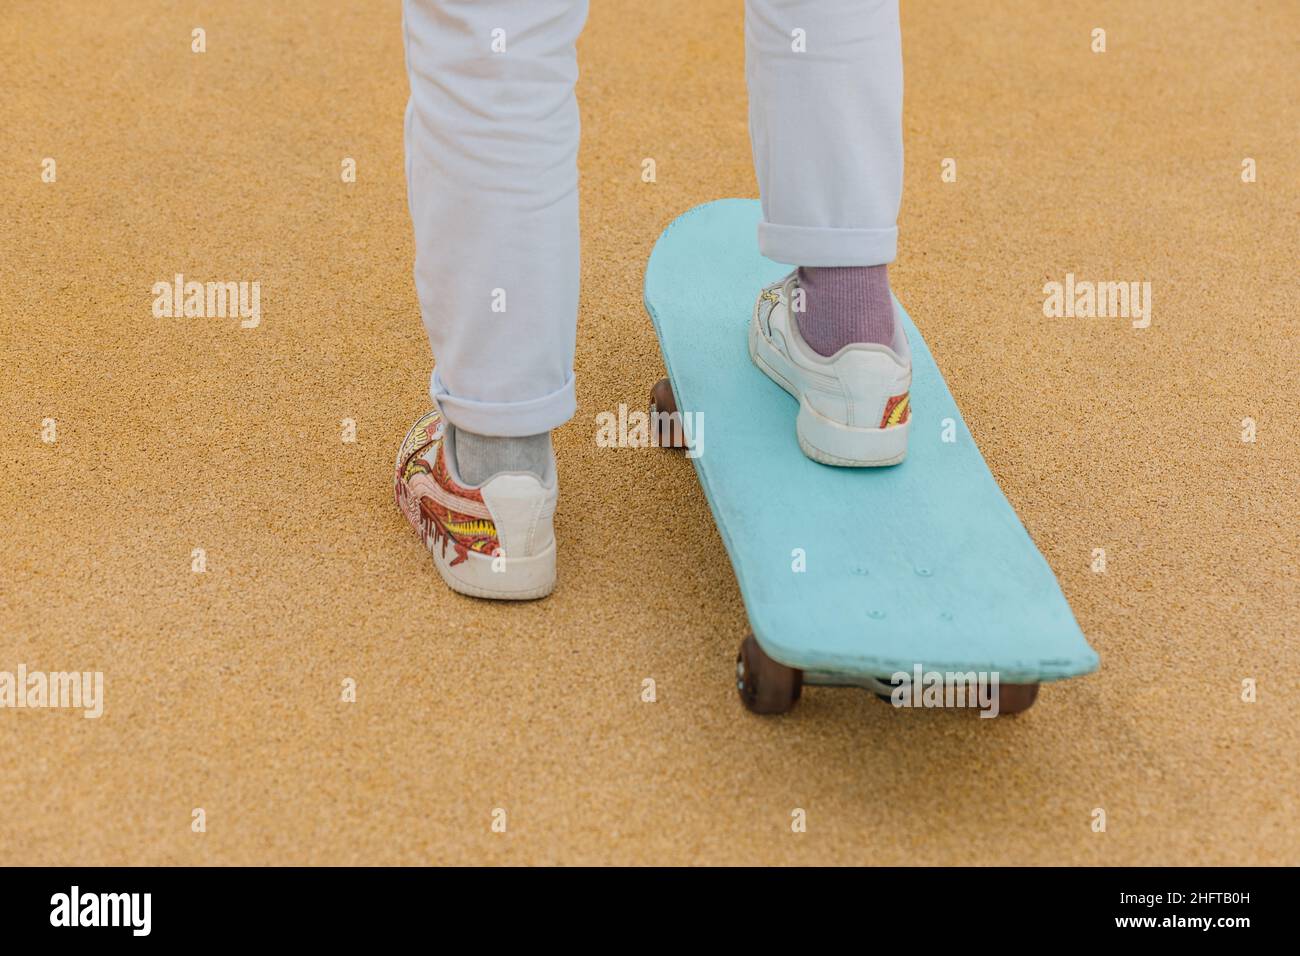 Rear view of unrecognizable person with legs on skateboard. Stock Photo